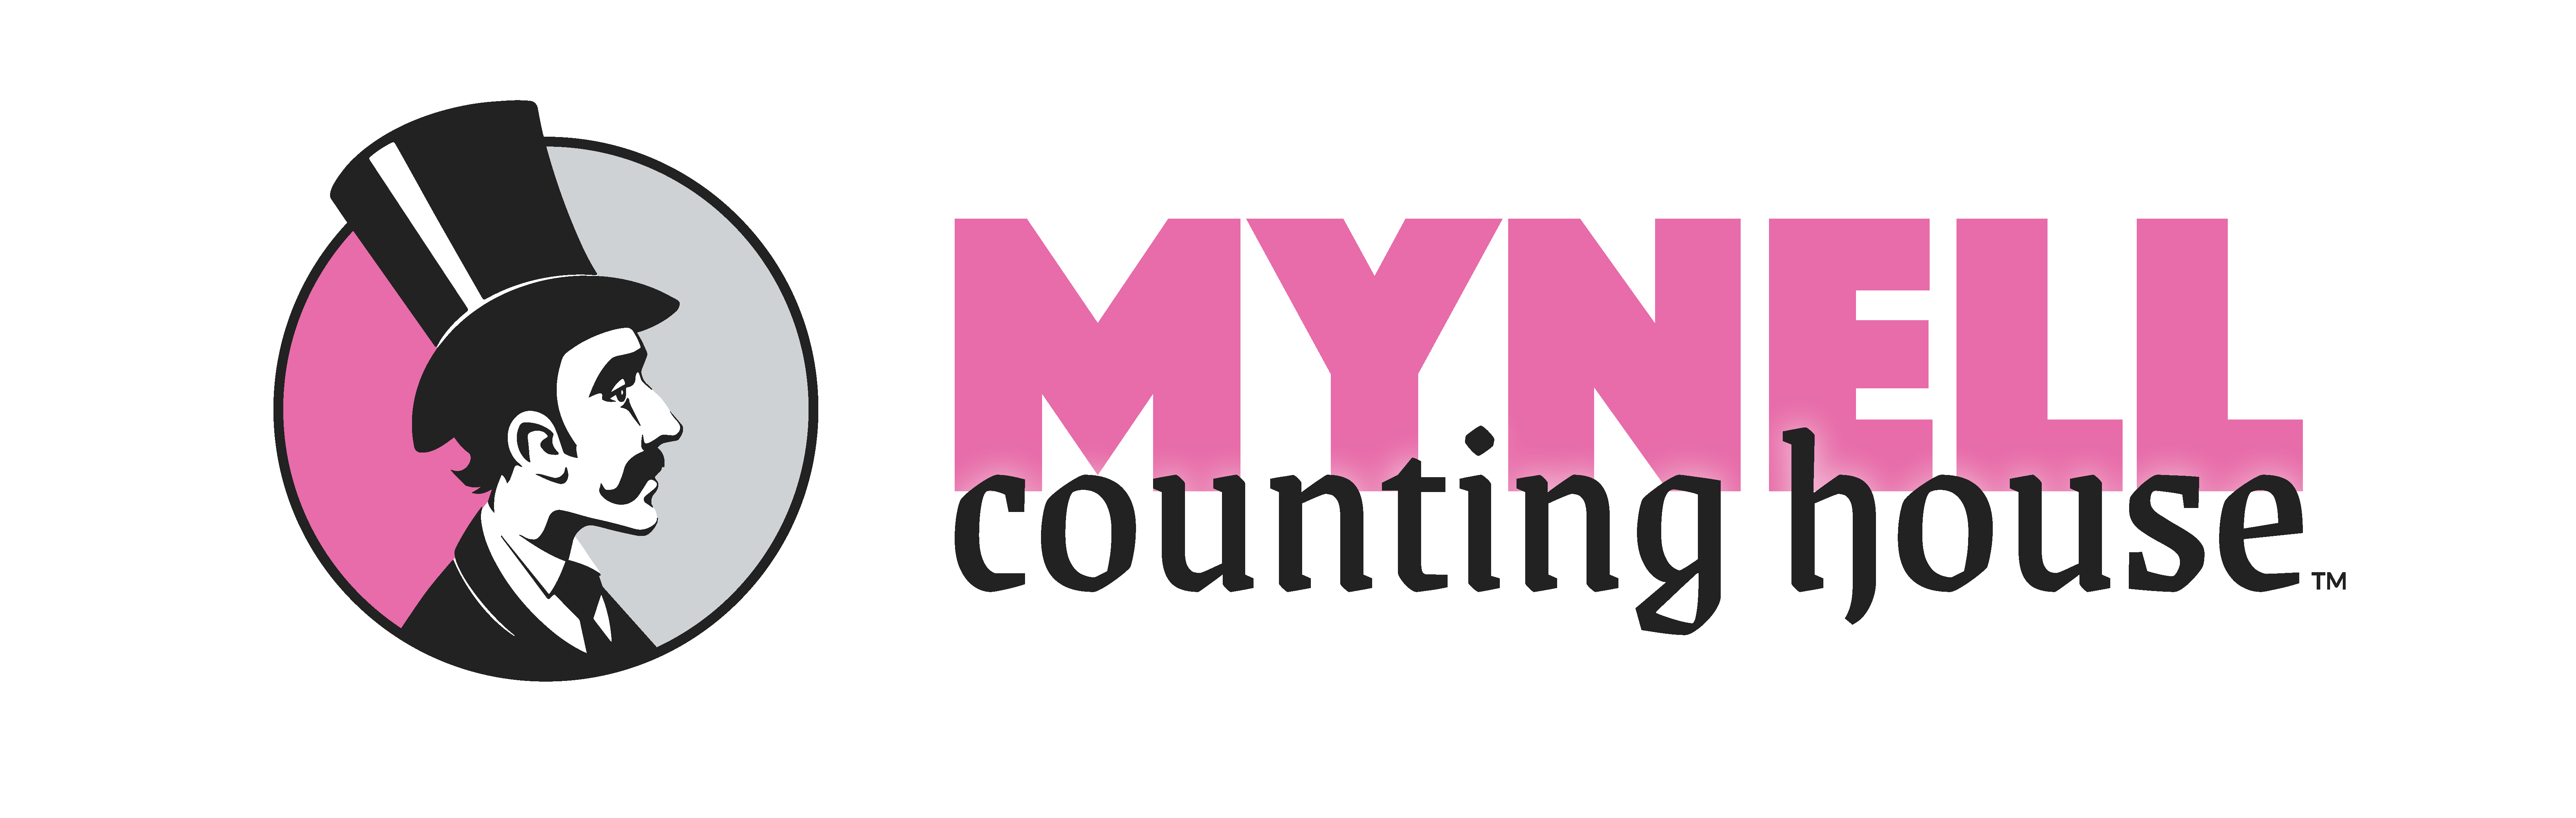 Mynell Counting House